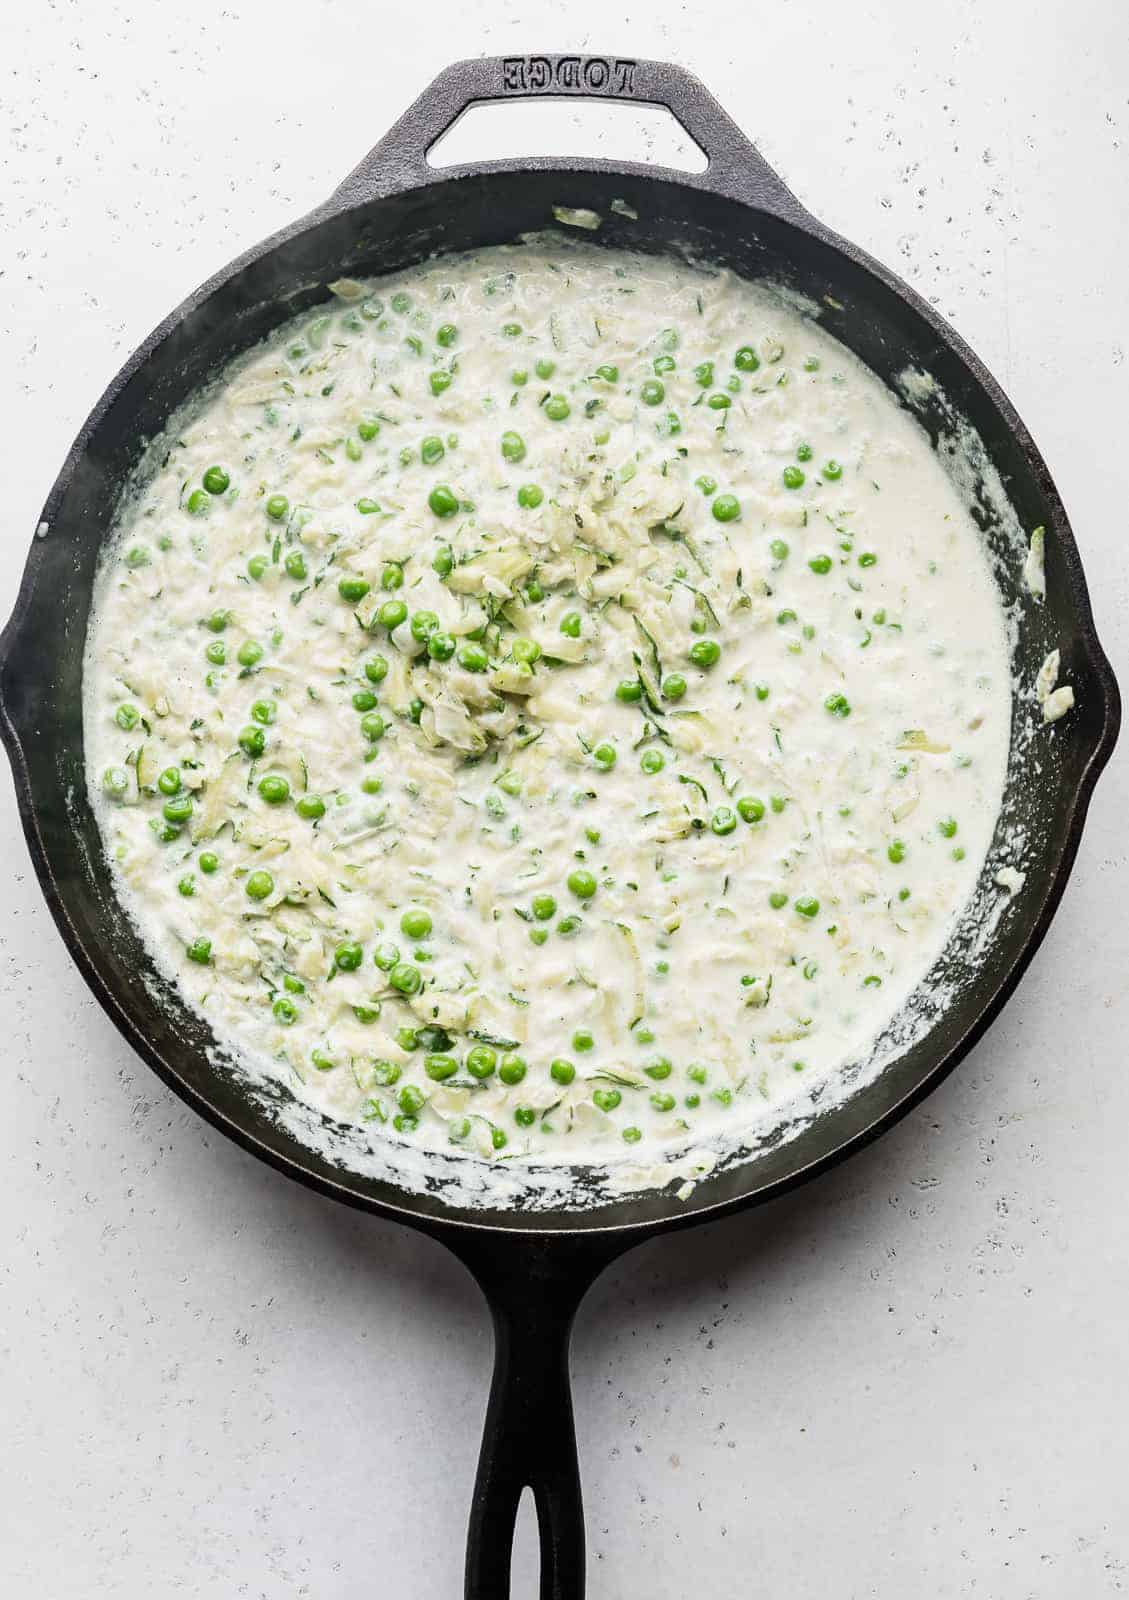 A black skillet with shredded zucchini in a white sauce.